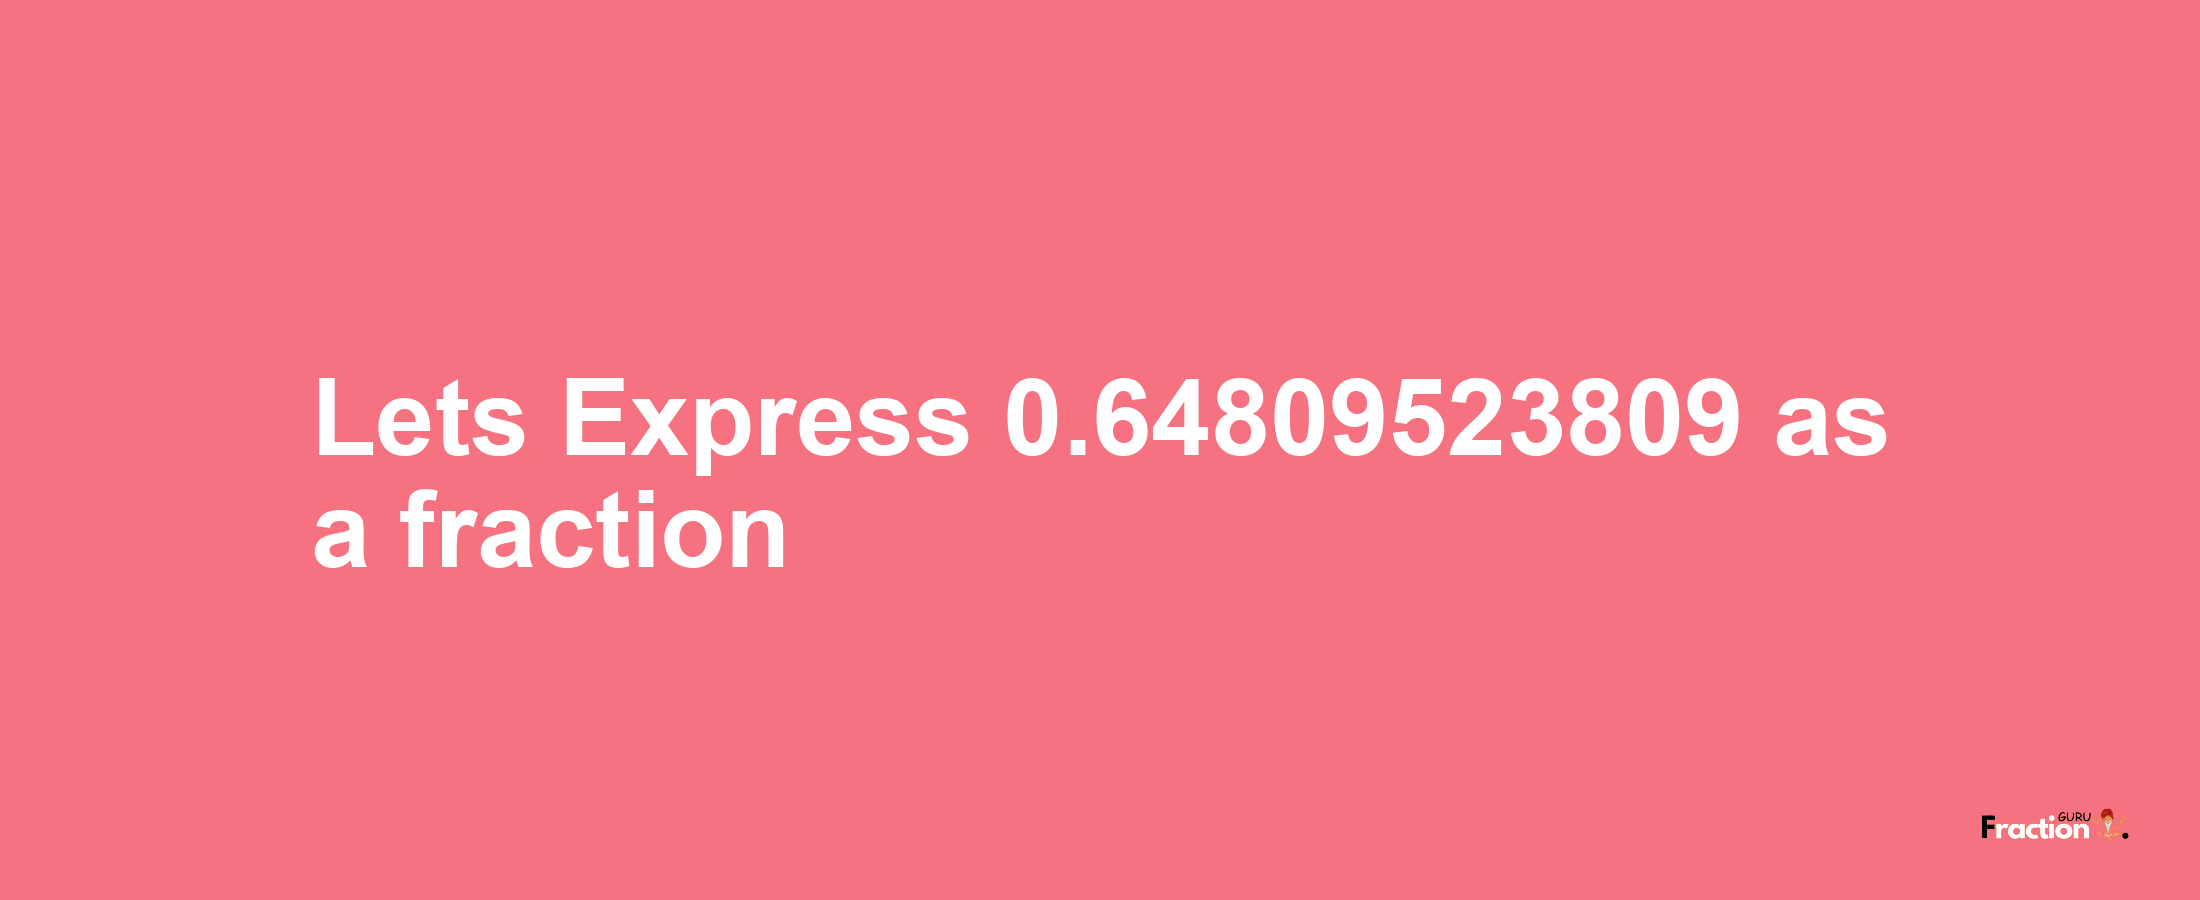 Lets Express 0.64809523809 as afraction